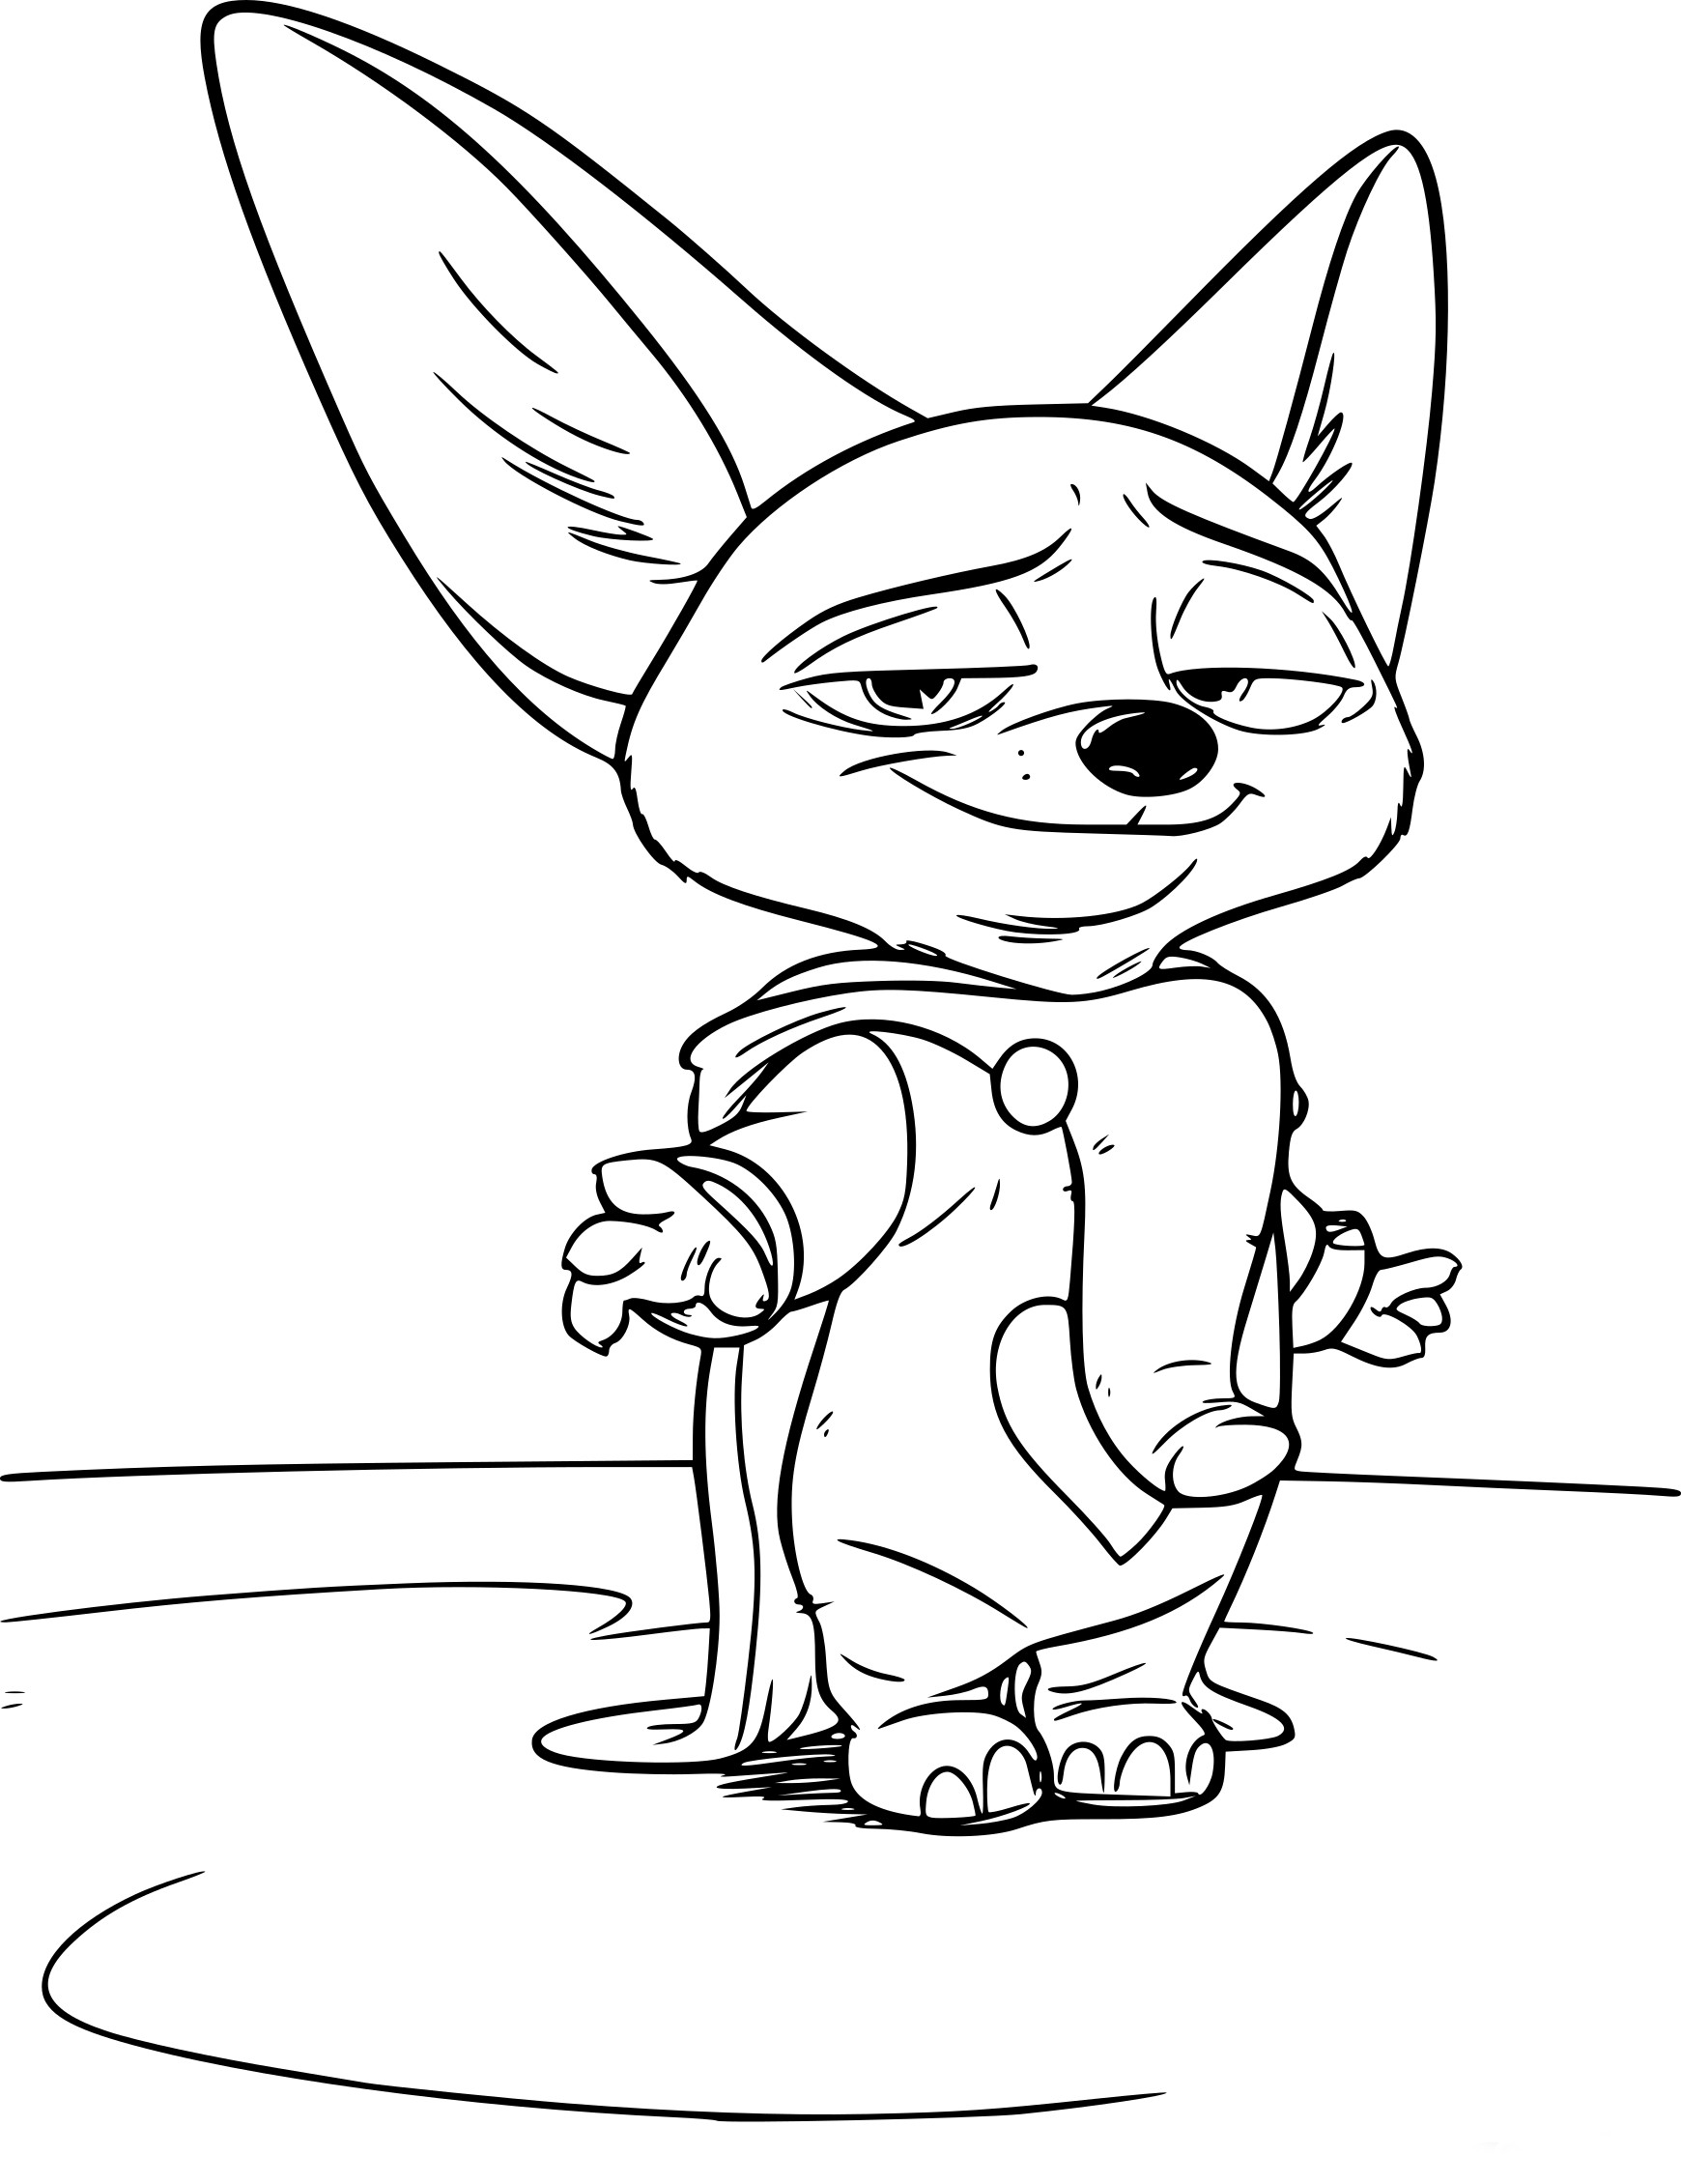 Finnick Zootopie coloring page